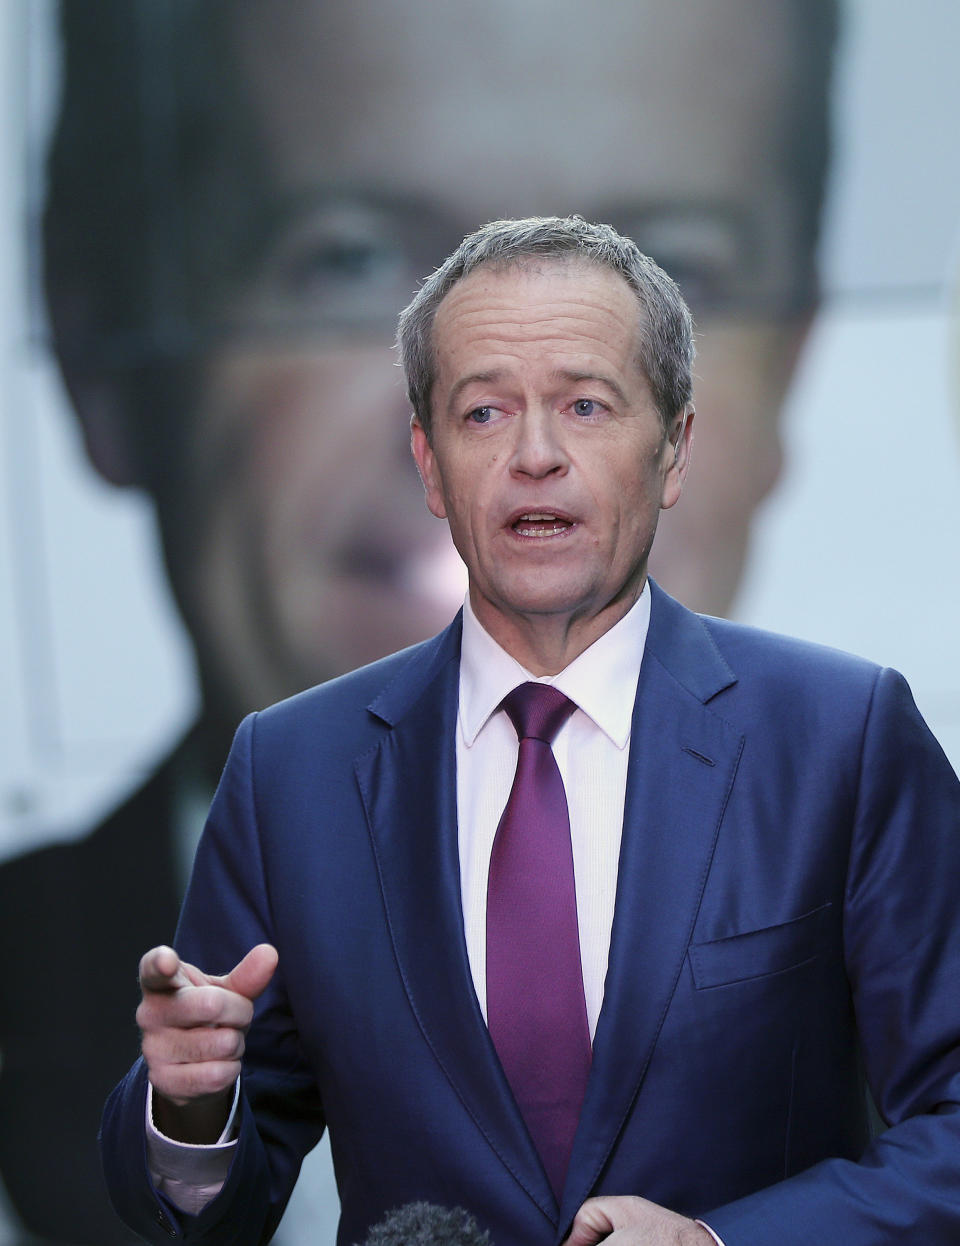 In this July 2, 2016, file photo, Australian Labor Party leader Bill Shorten answers questions during a breakfast show television interview on election day in Sydney, Australia. Shorten, an outspoken critic of U.S. President Donald Trump, is the favorite to become Australian prime minister. Shorten’s party, the center-left Labor Party, has led the conservative coalition in most opinion polls in the last three years. (AP Photo/Rob Griffith, File)